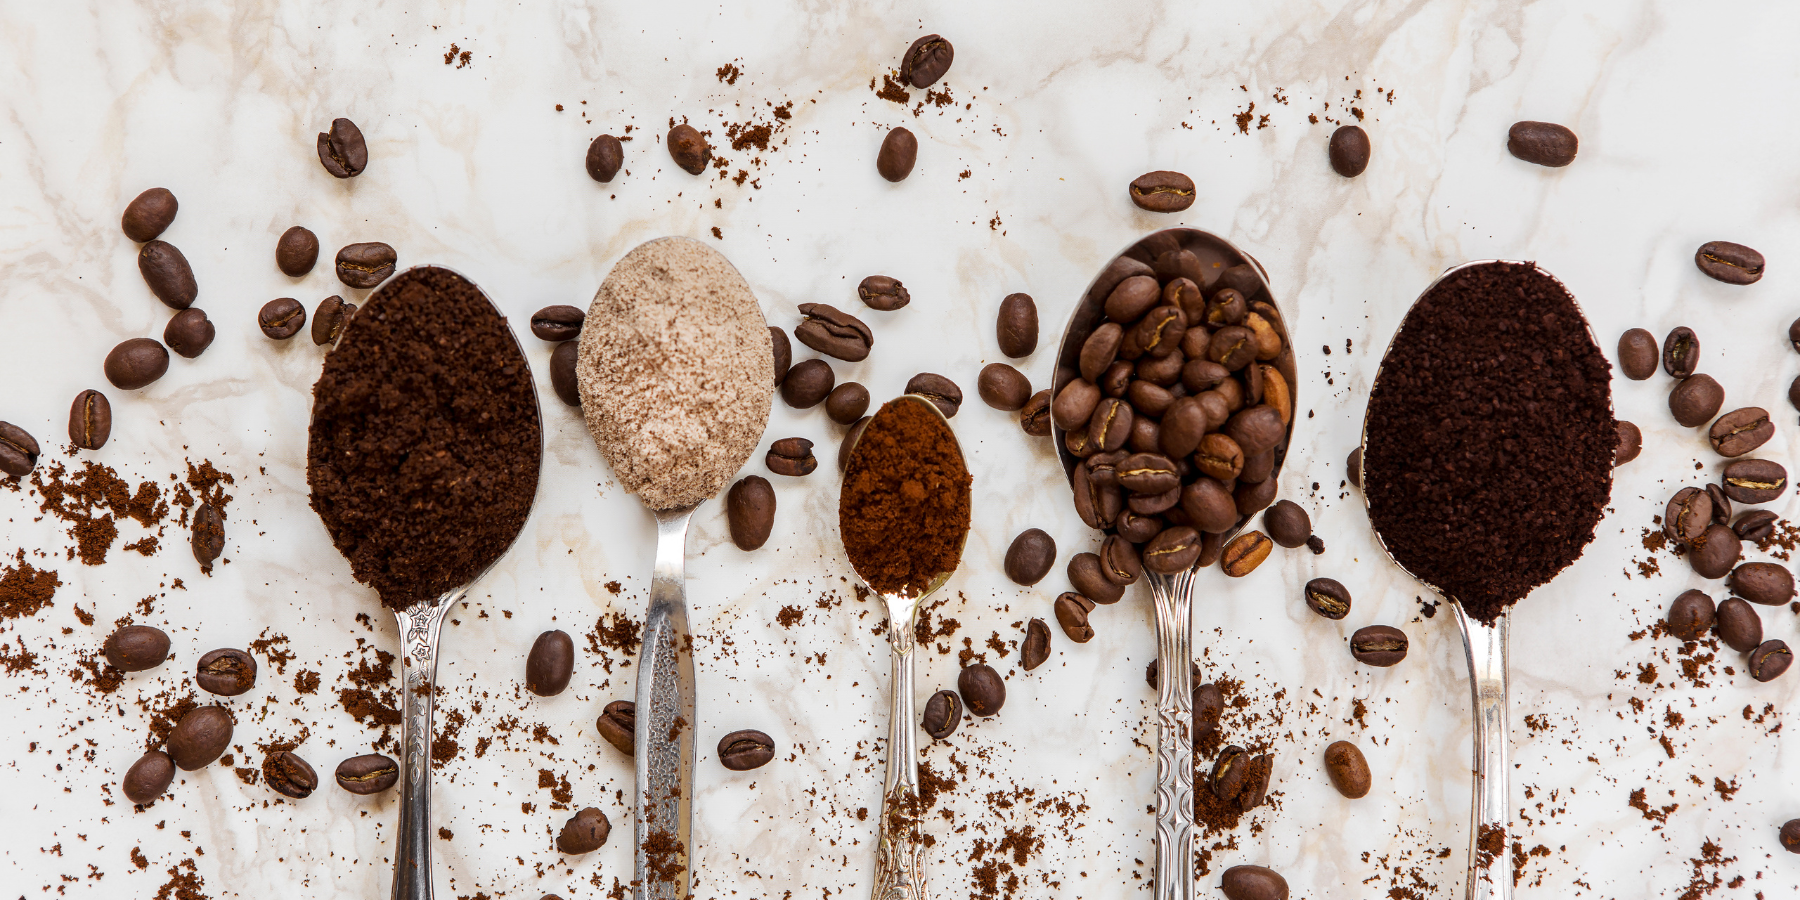 Is instant coffee good for you?